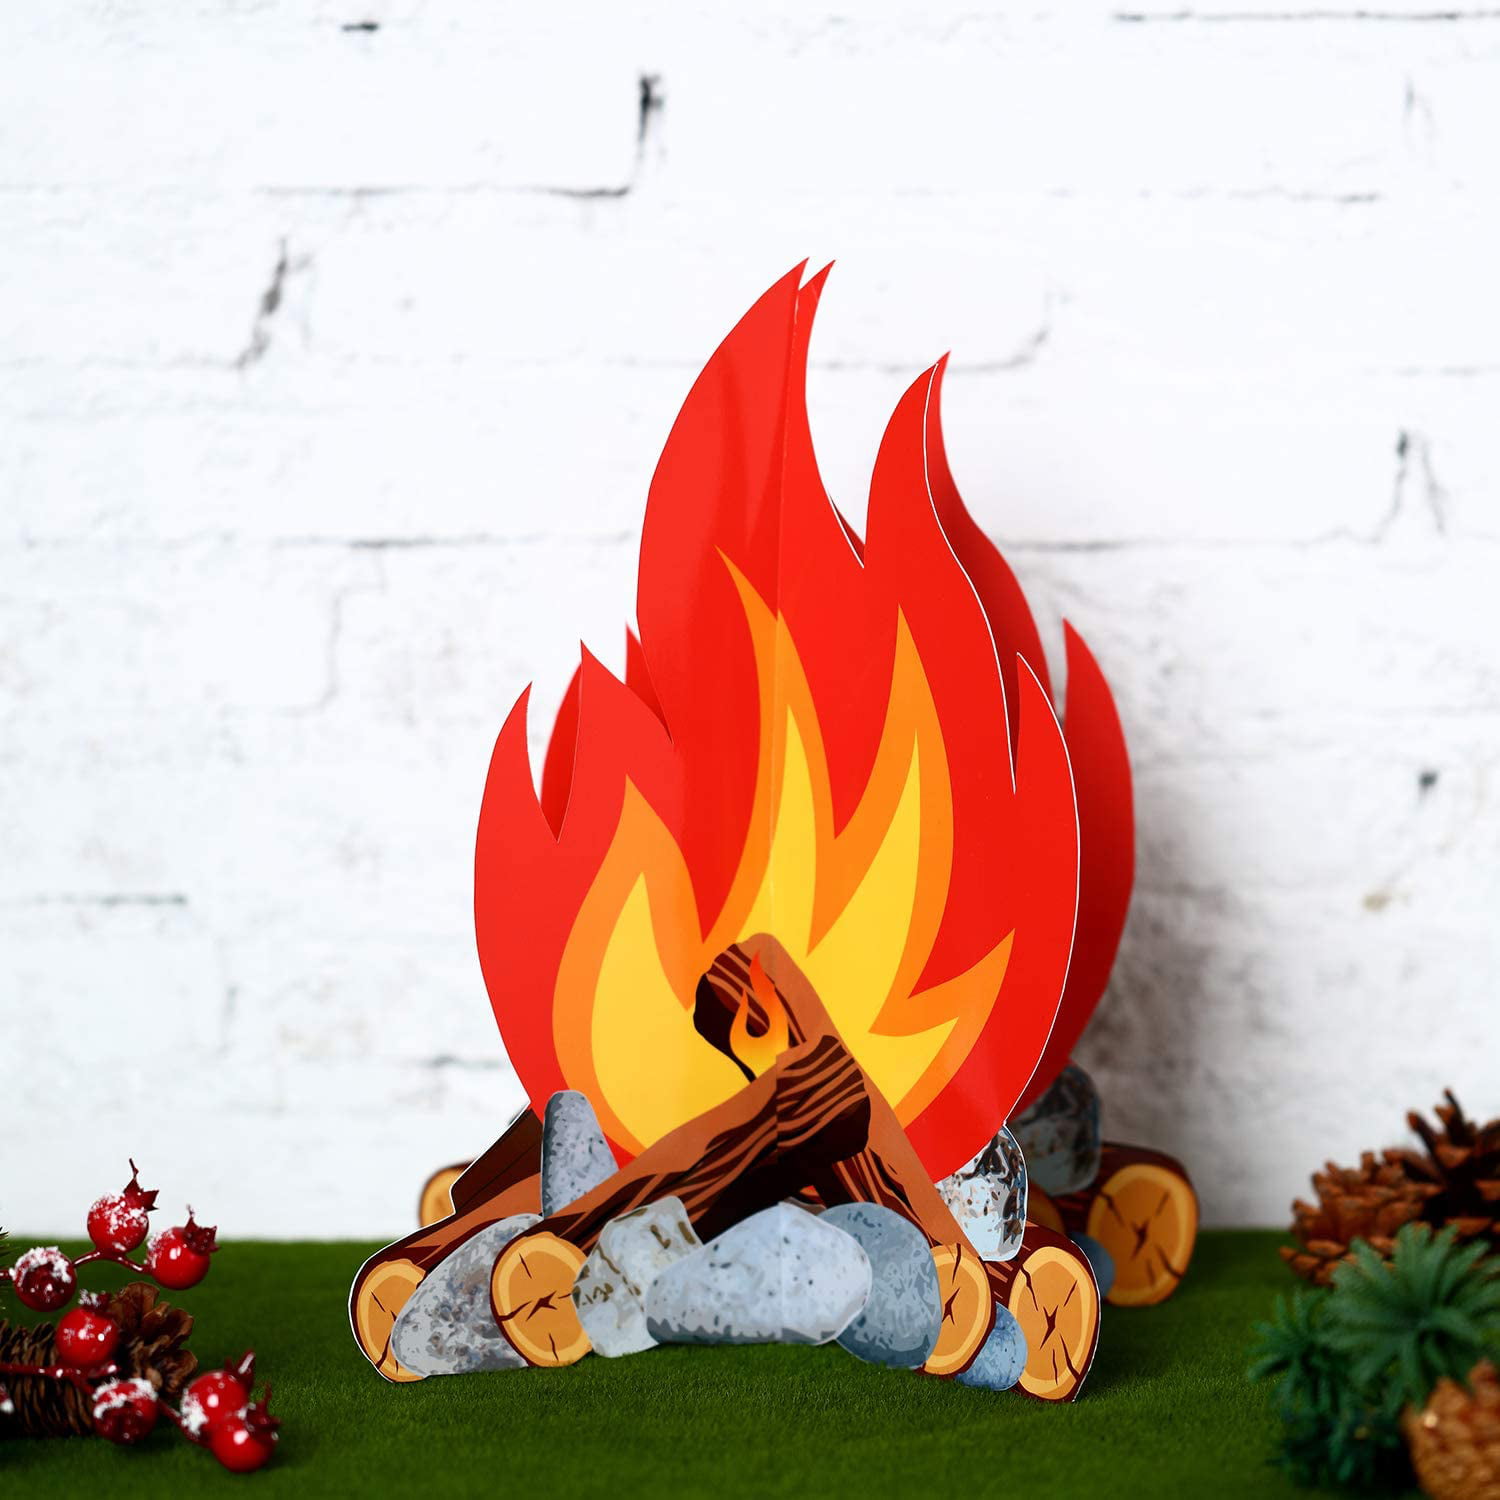 3D Decorative Cardboard Campfire Flame Party Decorative Flame Paper for Campfire Party Decorations 4 Pieces Fake Flame Paper Cardboard Campfire Artificial Fire Fake Flame Paper 